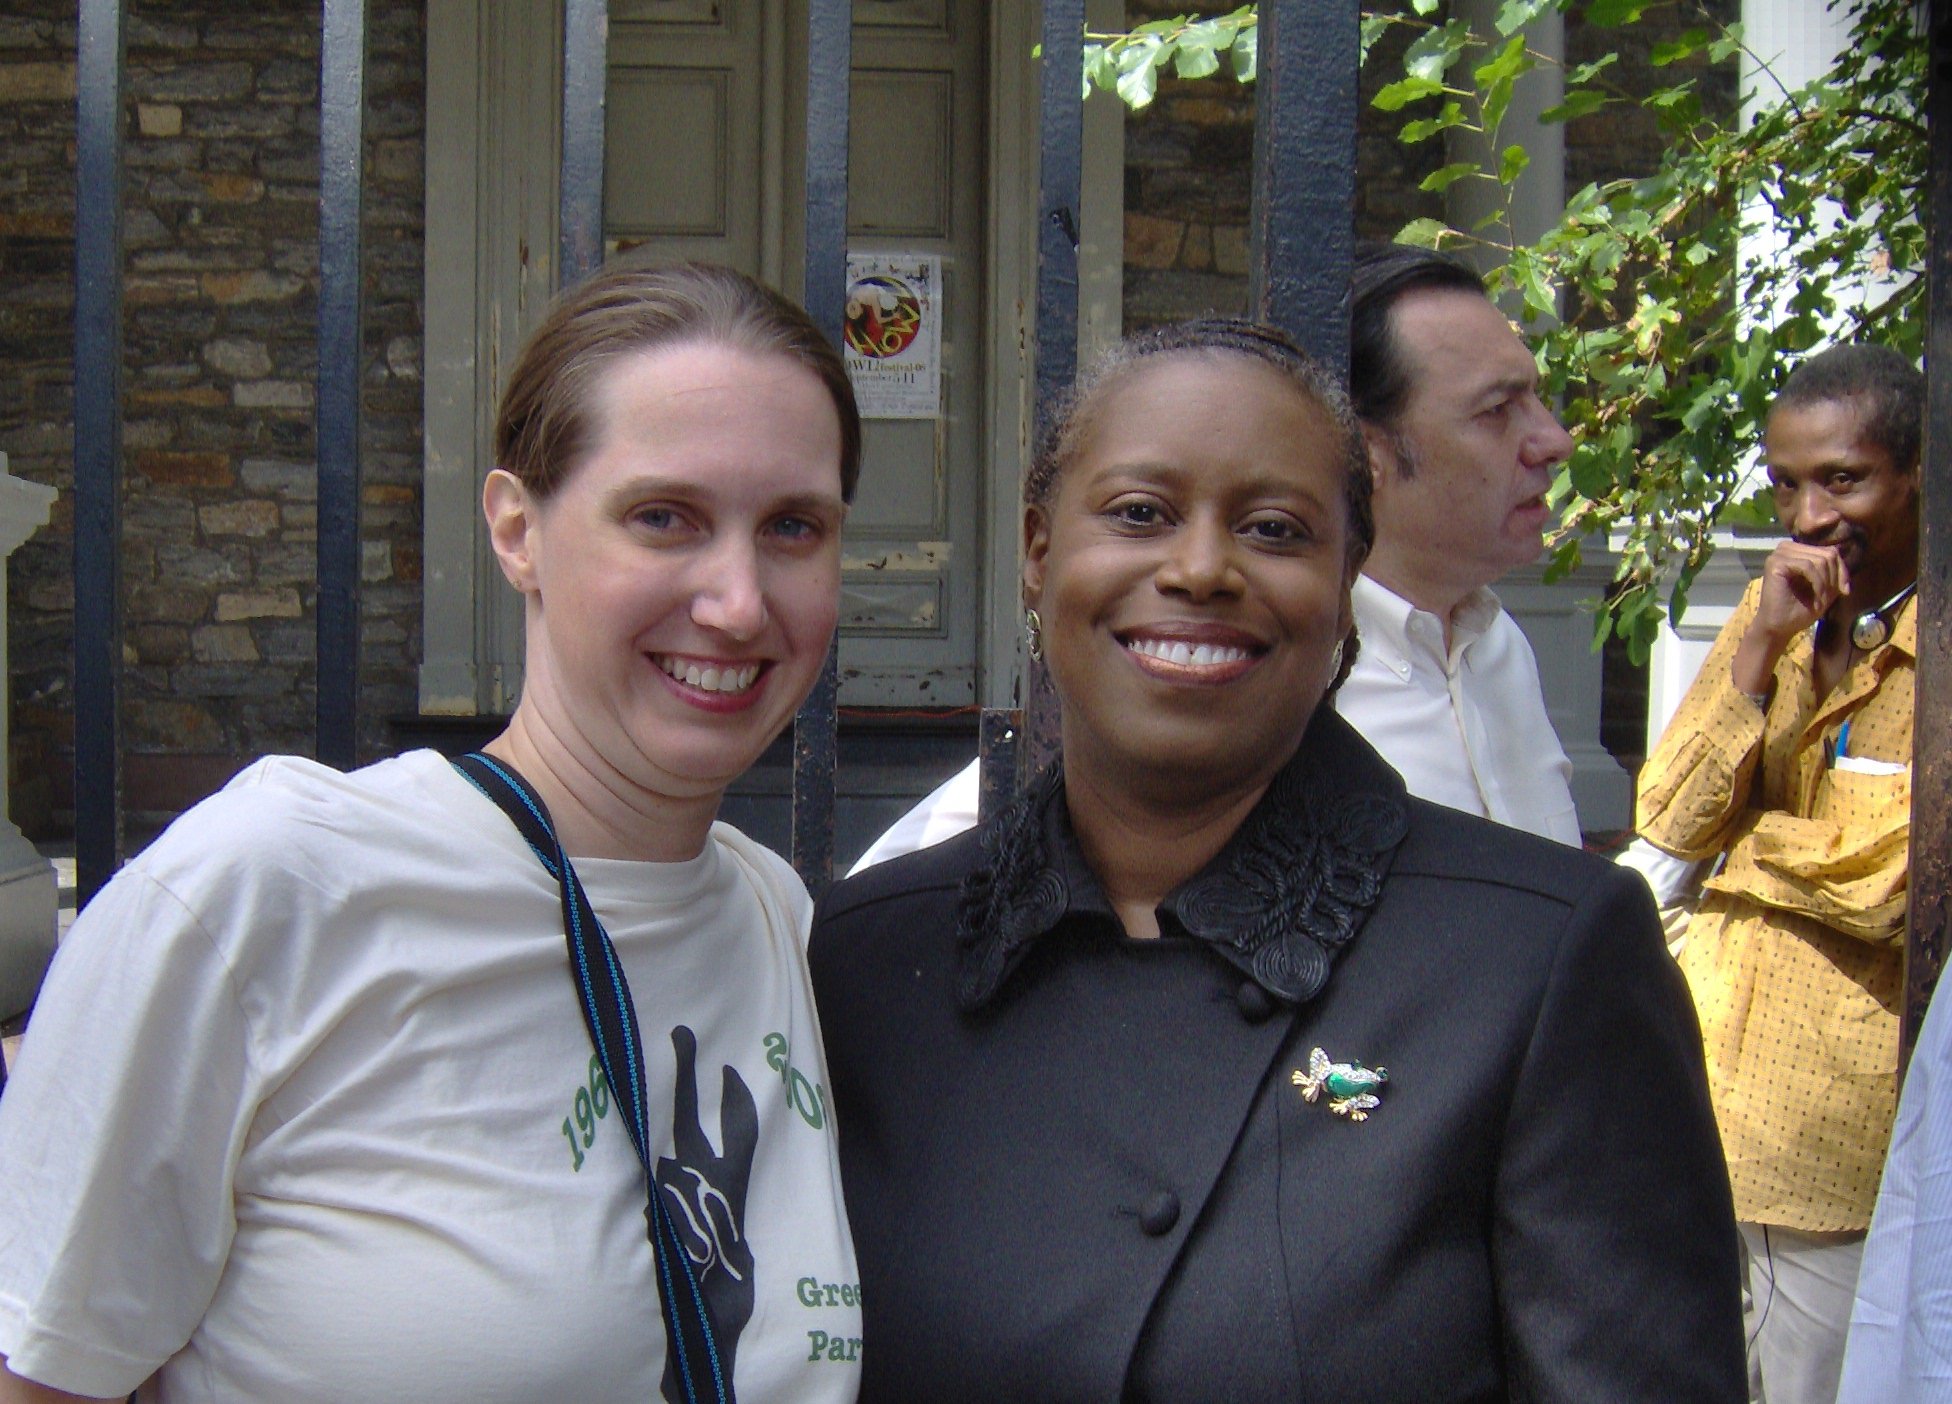 Green Party Presidential Candidate Cynthia McKinney